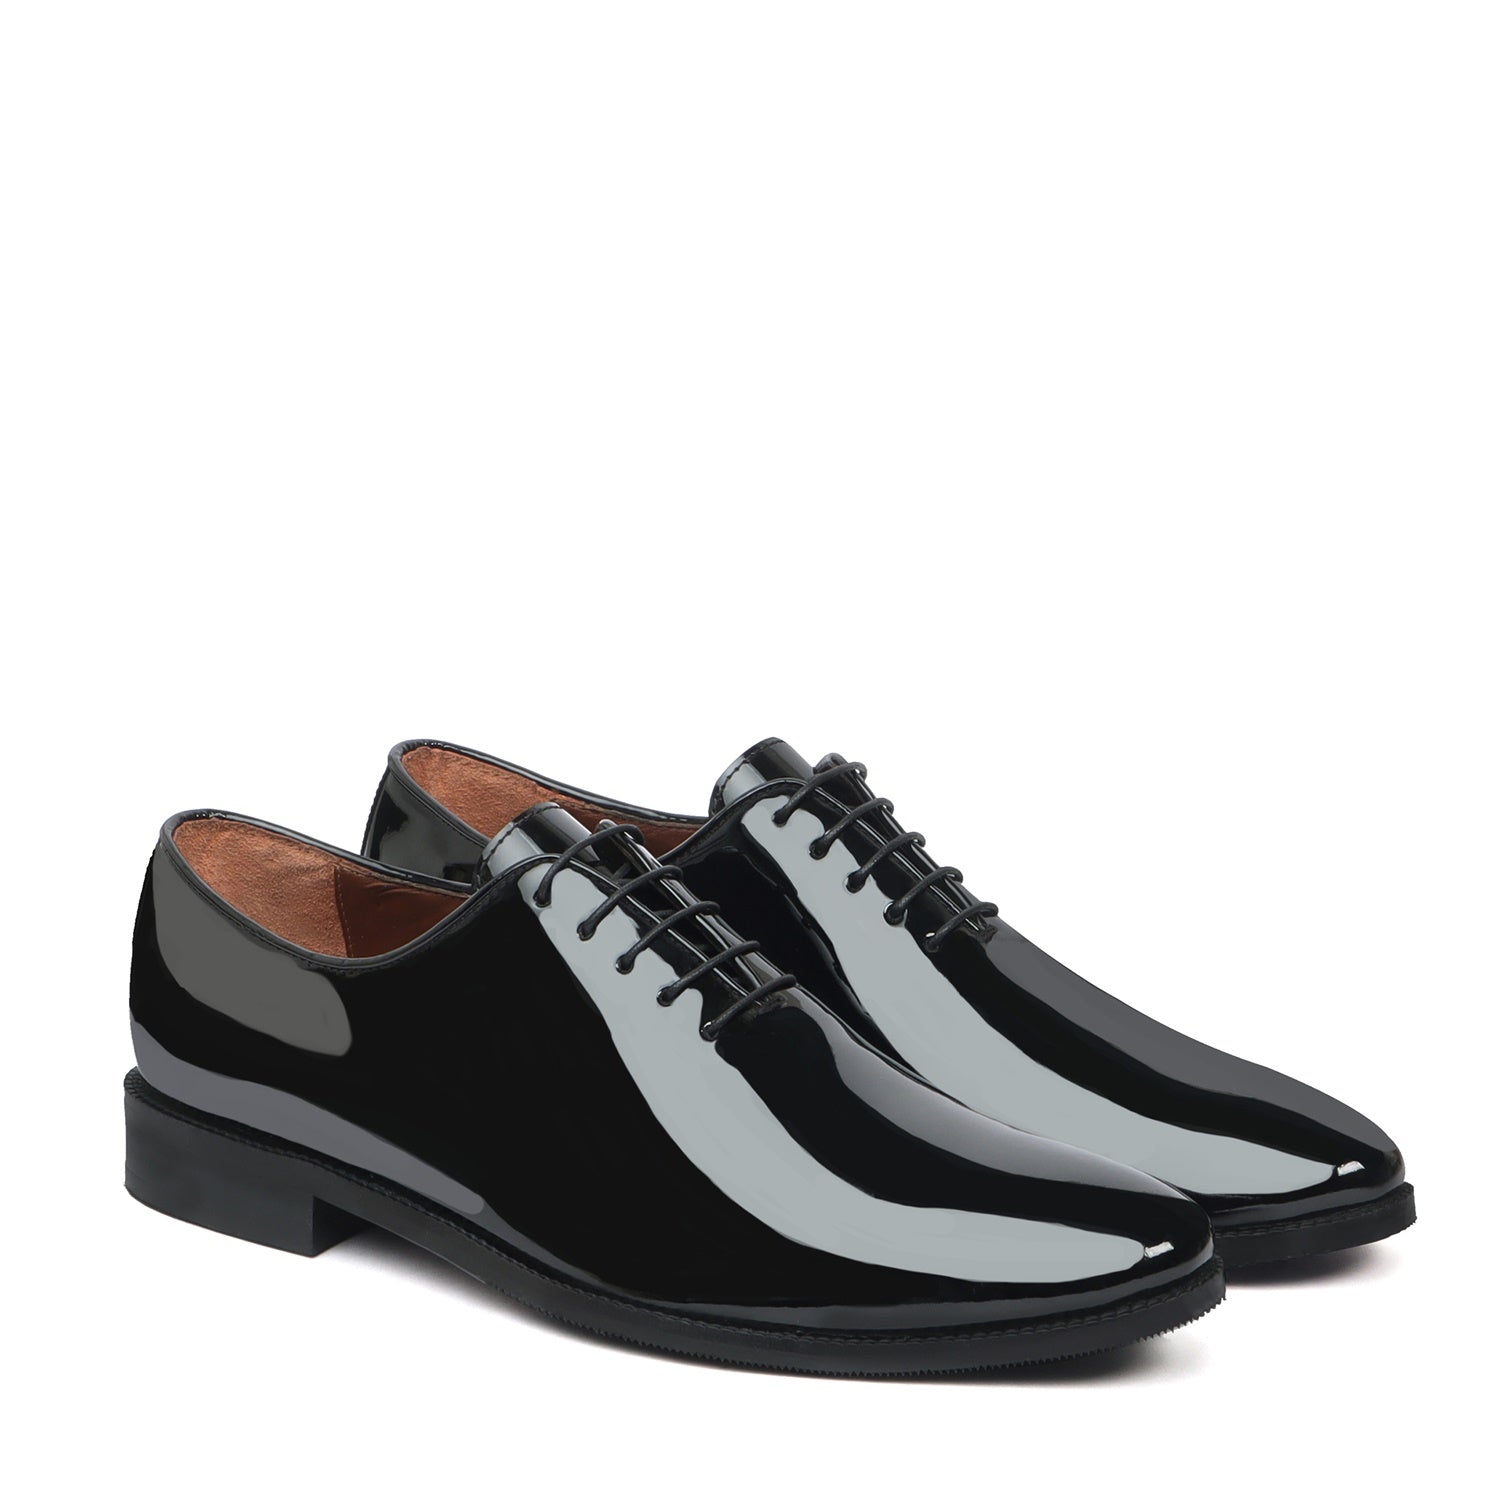 Black Patent Whole Cut/One-Piece Oxford Leather Lace-Up Shoes For Men By Brune & Bareskin